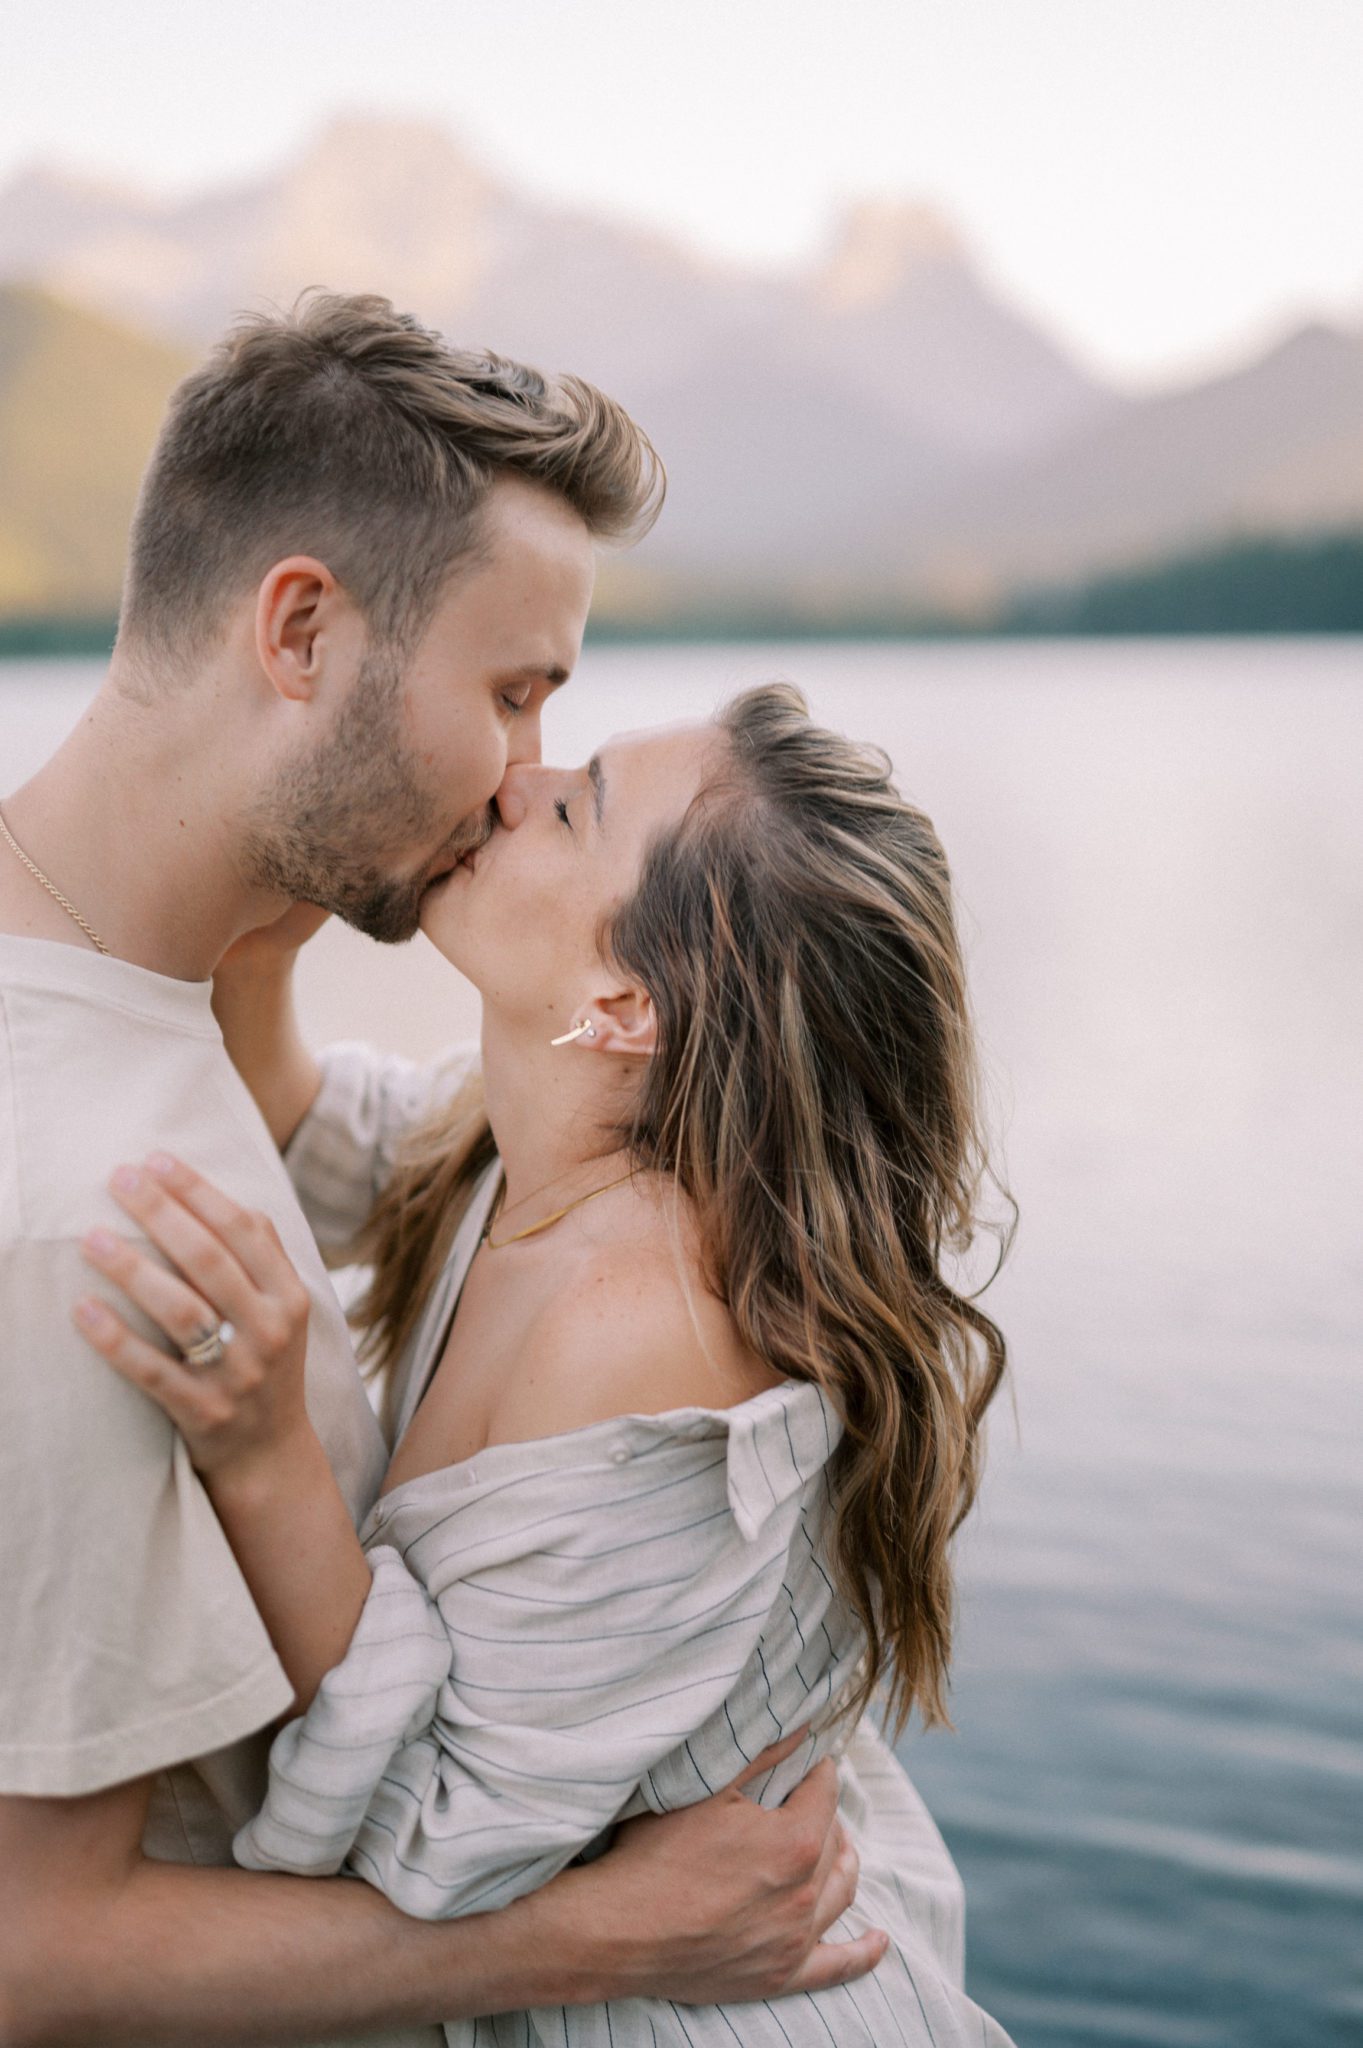 Lakeside and mountain couples session inspiration